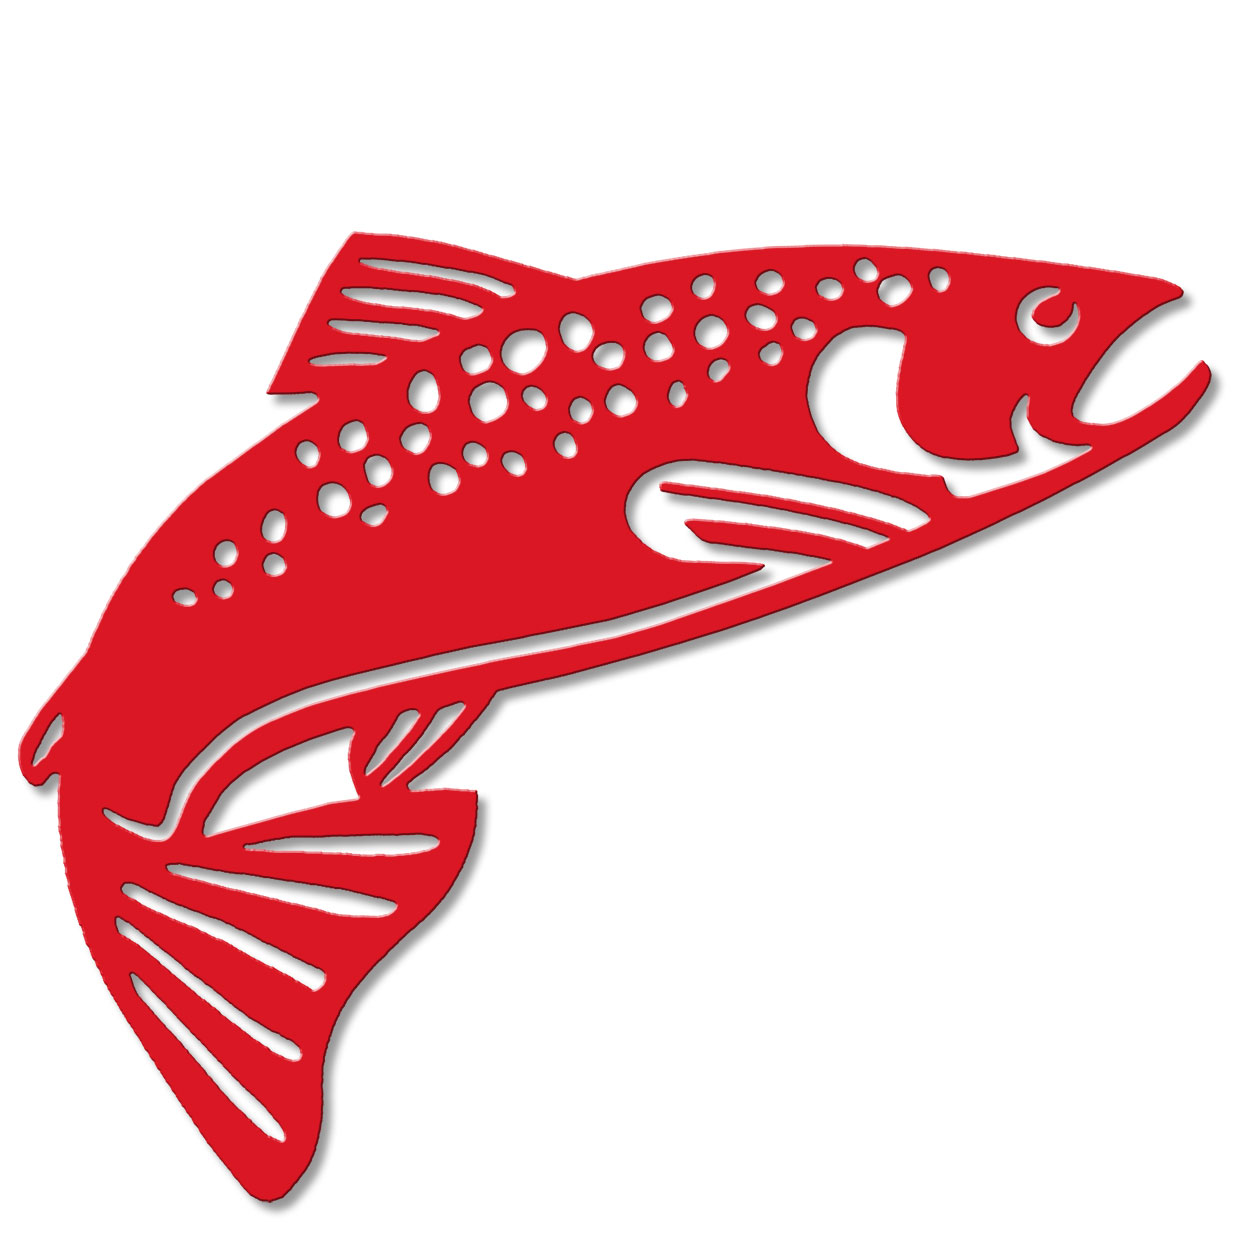 625473S - Trout Right 12-inch Metal Wall Art